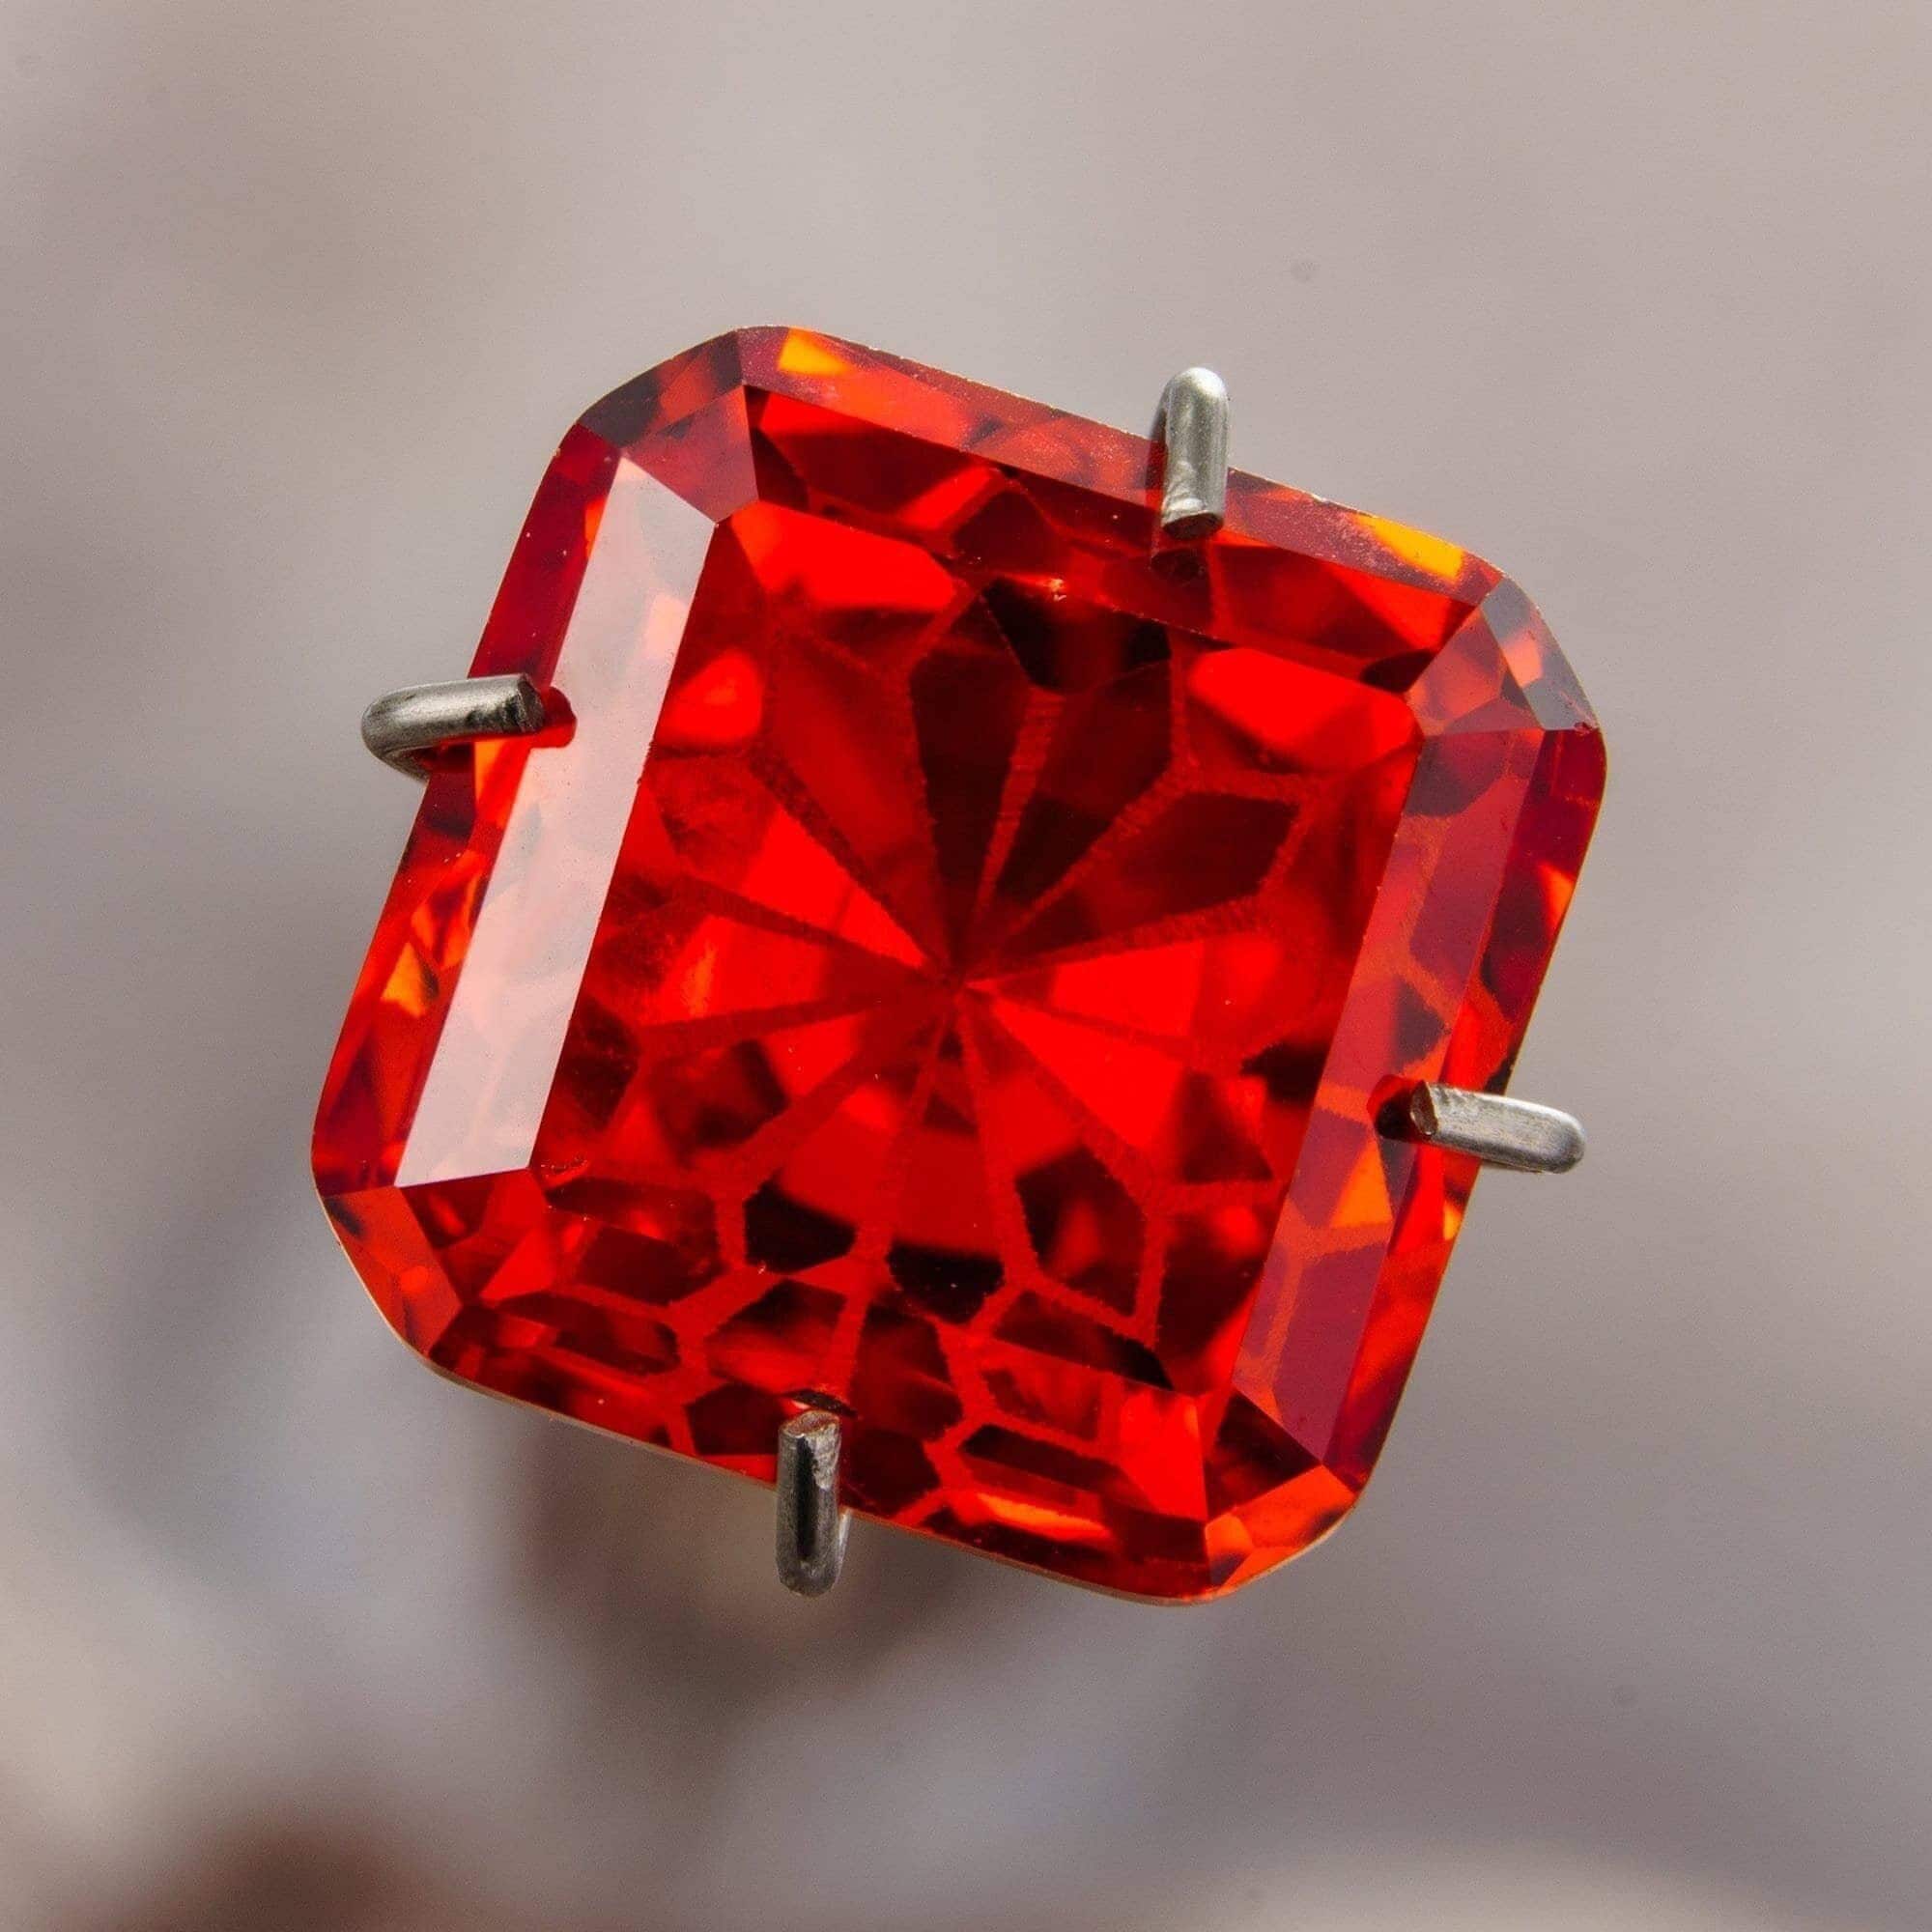 8mm ascher loose cubic zirconia fantasy square cut red color